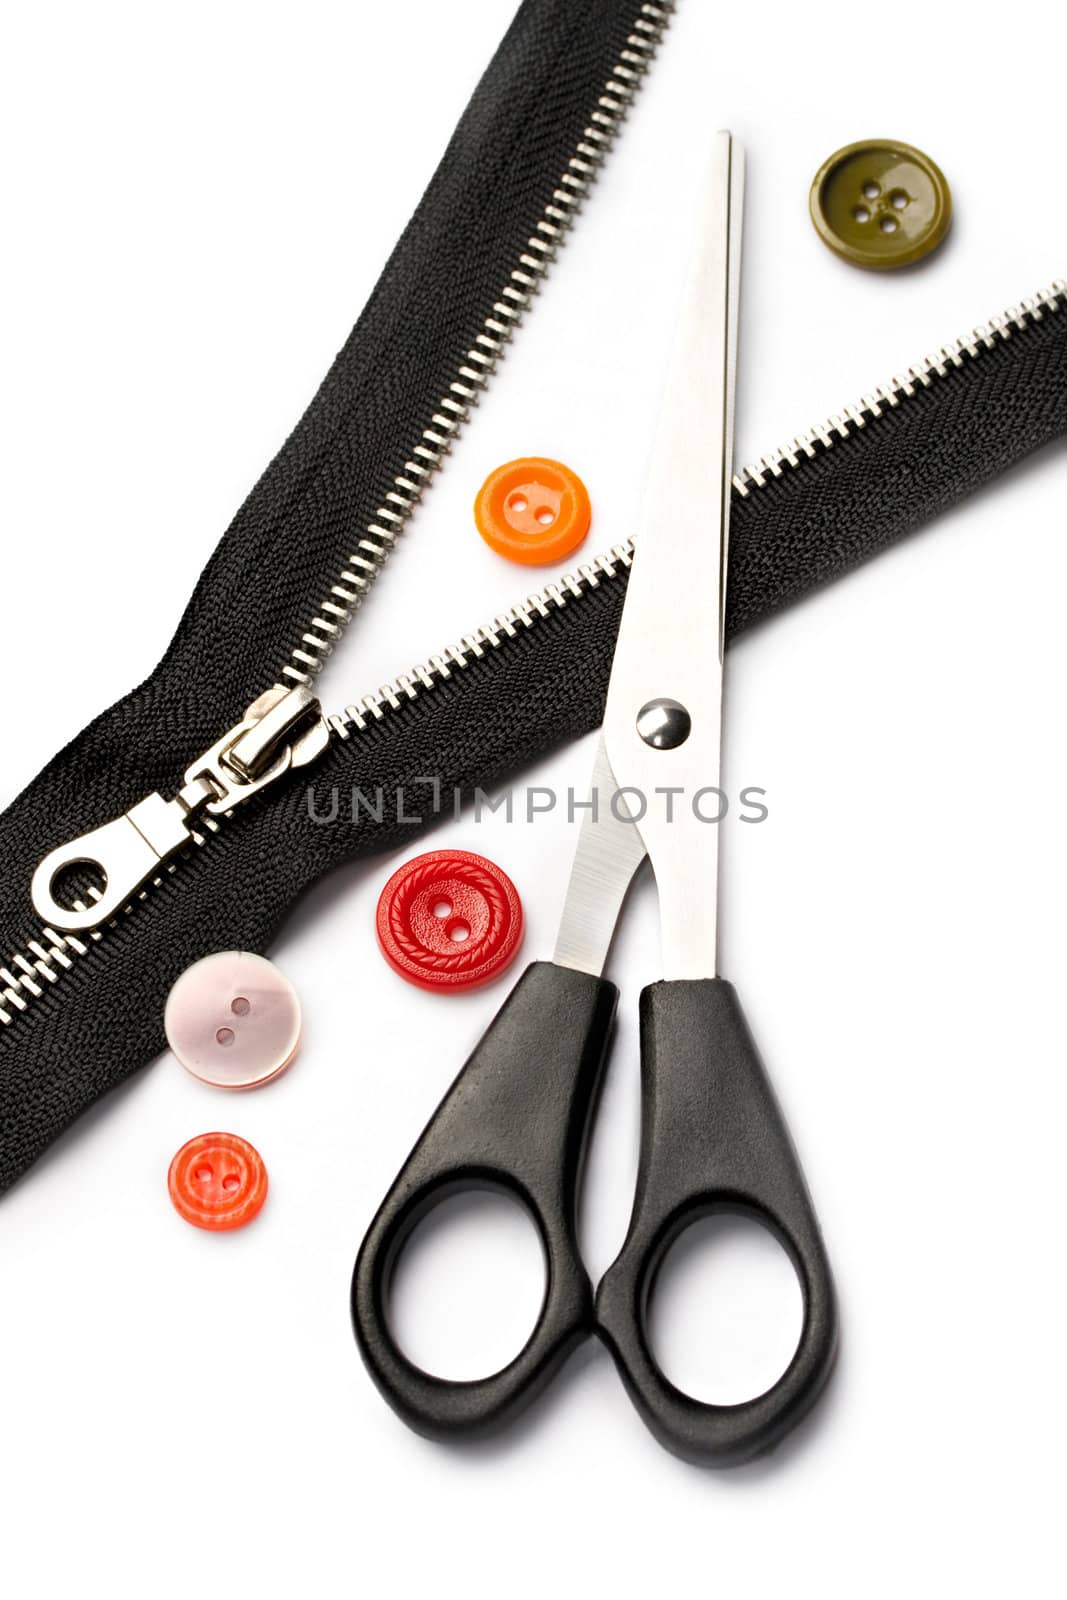 Scissors, zipper and button isolated on white